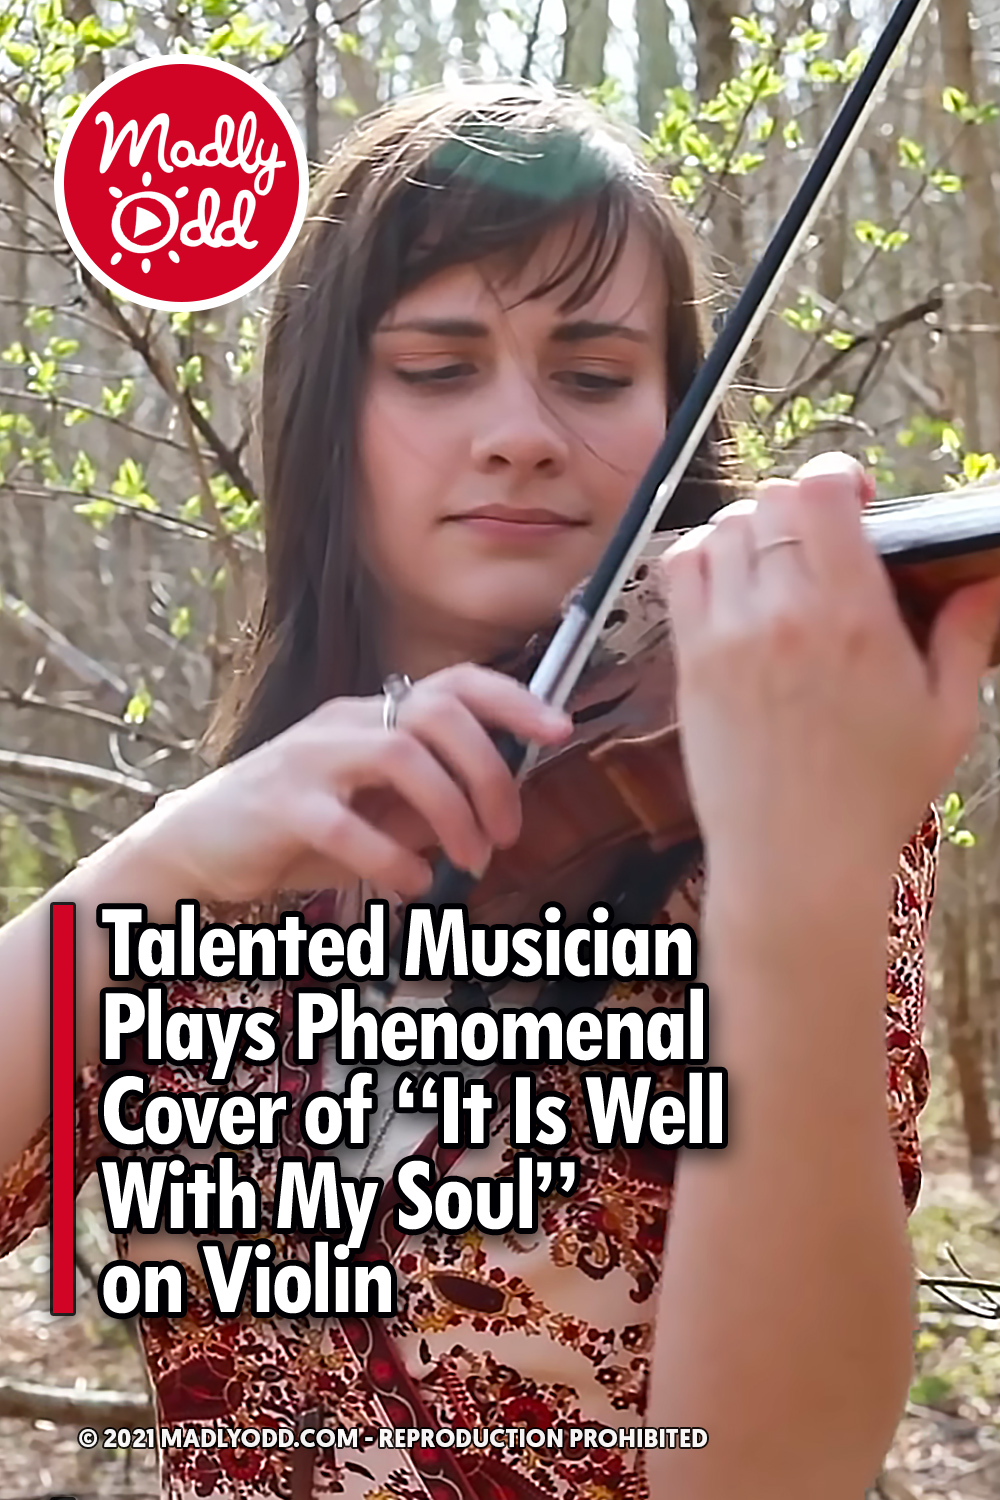 Talented Musician Plays Phenomenal Cover of “It Is Well With My Soul” on Violin